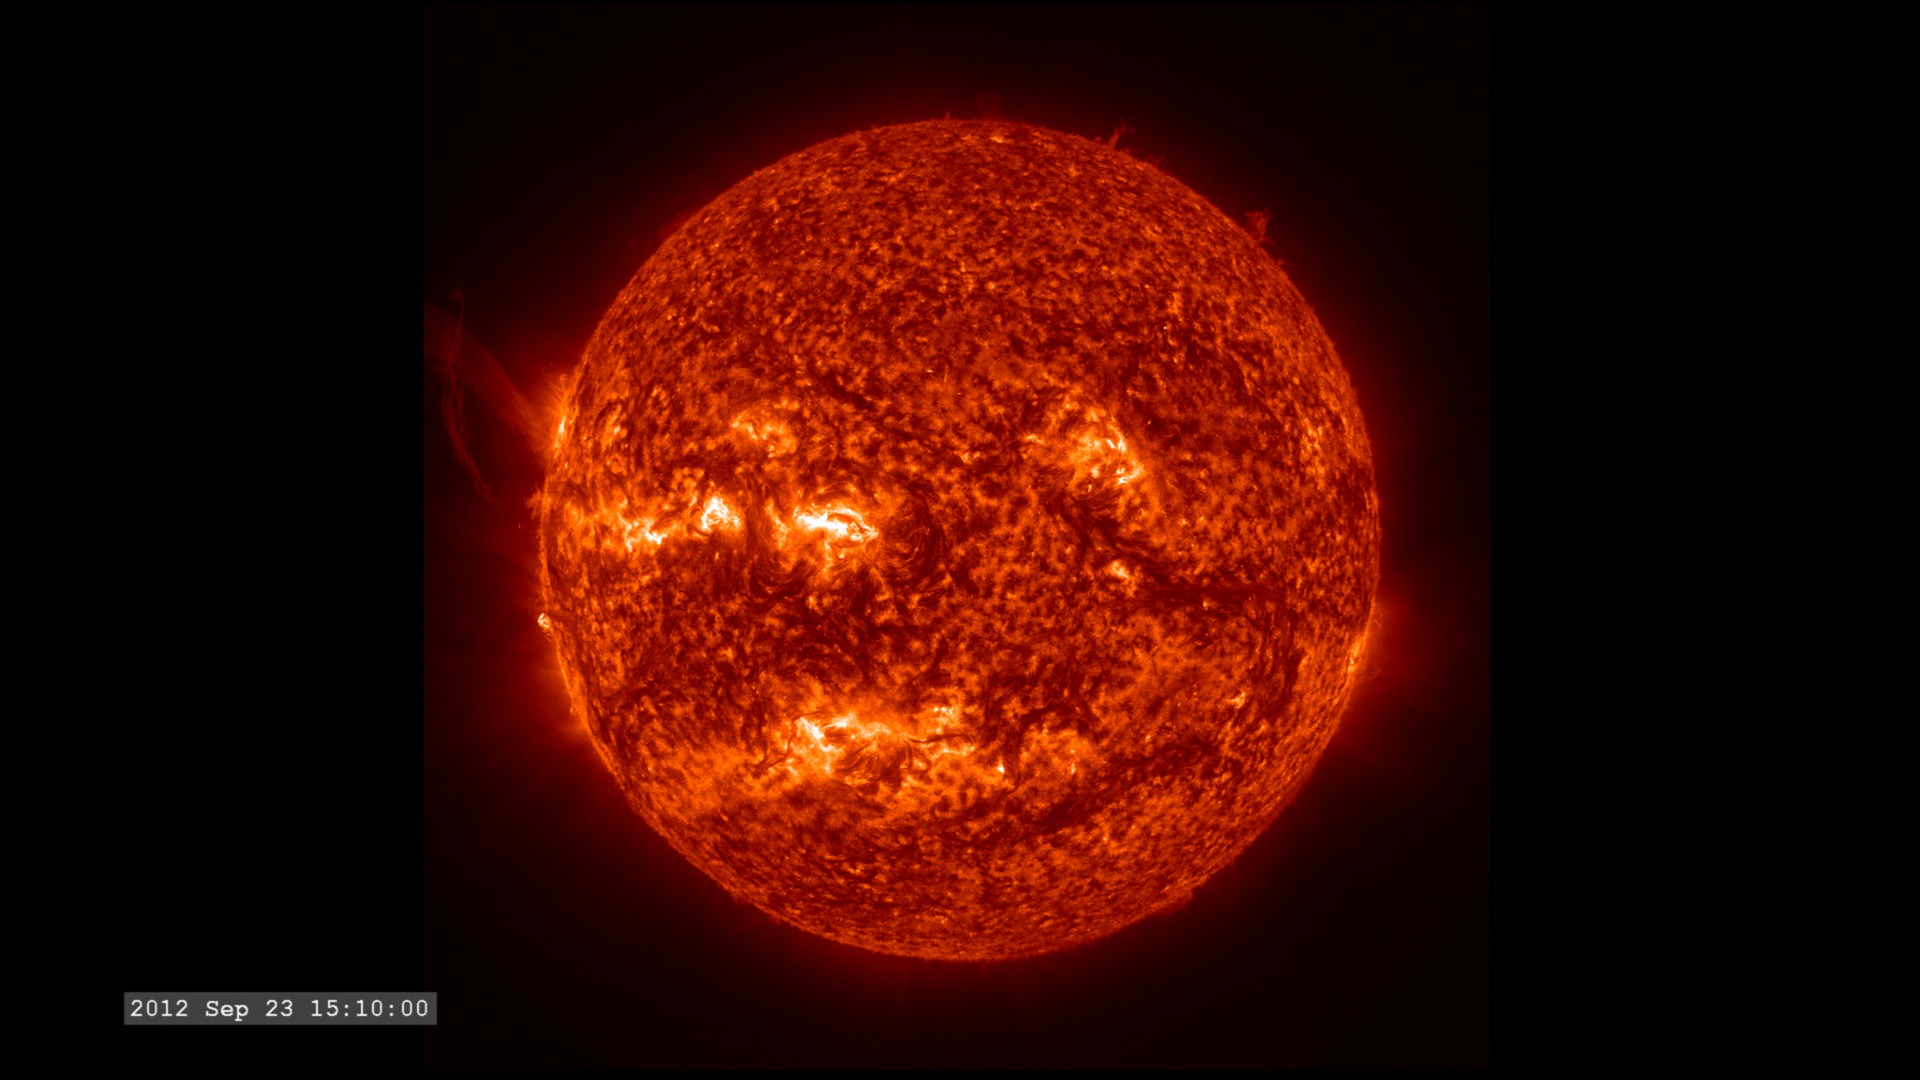 HD movie of the prominence eruption